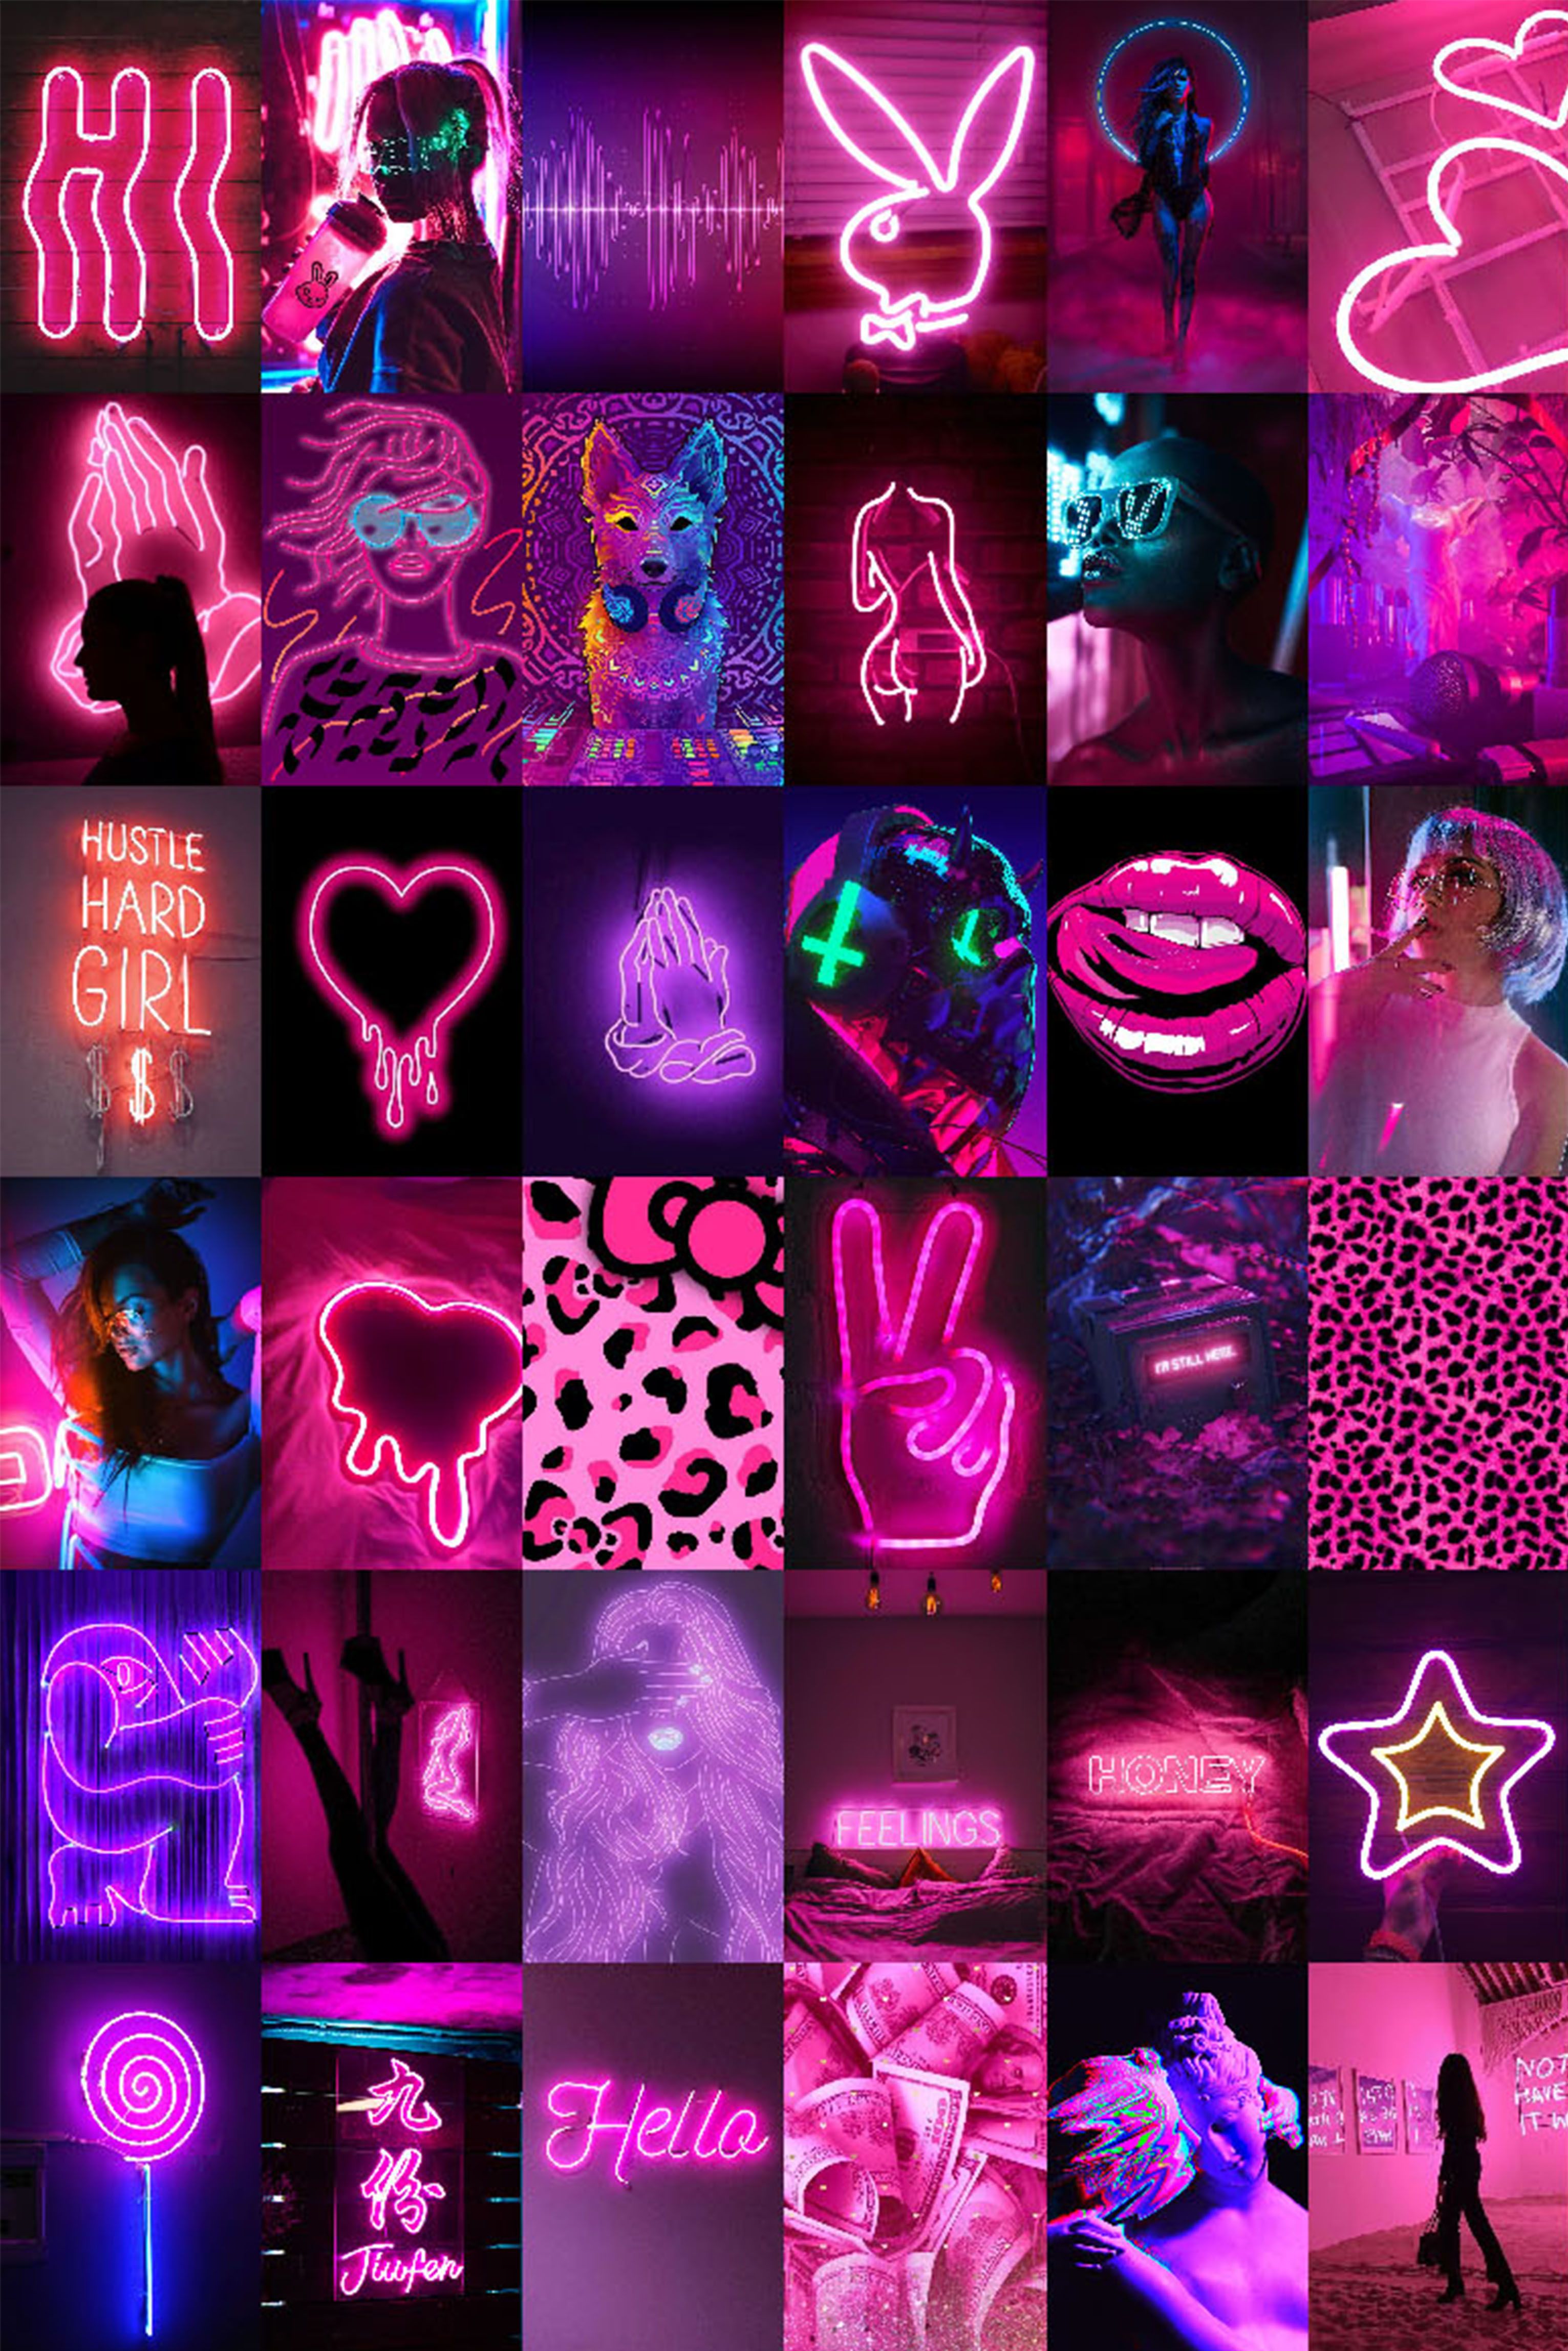 Pcs Pink Neon Wall Collage Kit Hot Boujee Aesthetic Room. Etsy. Pretty wallpaper iphone, Wallpaper iphone neon, Pink neon wallpaper